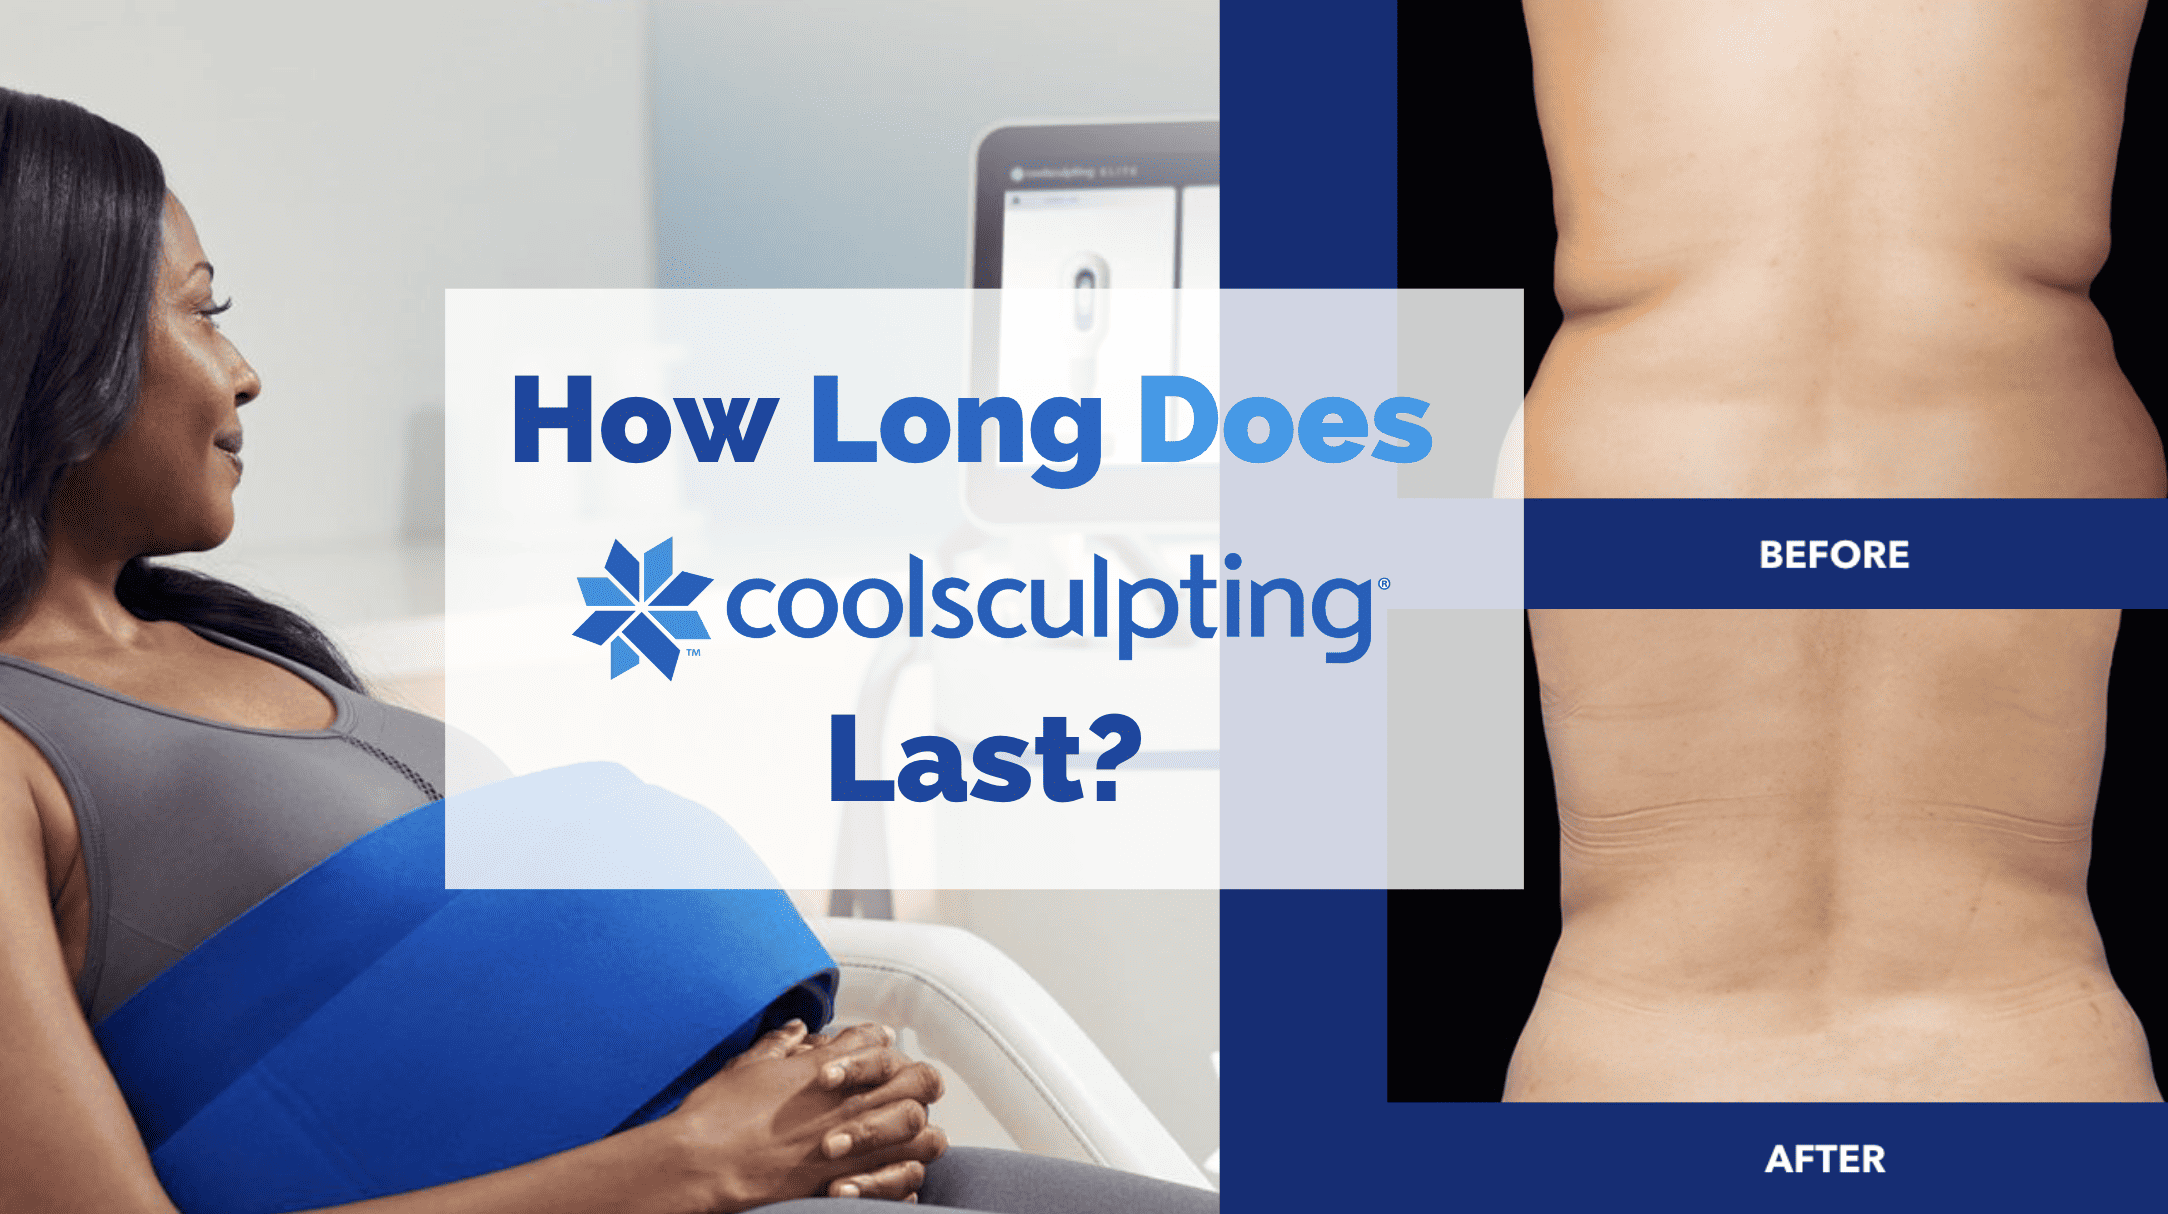 How Long Does CoolSculpting Last? with woman getting CoolSculpting and before/after pictures of the treatment